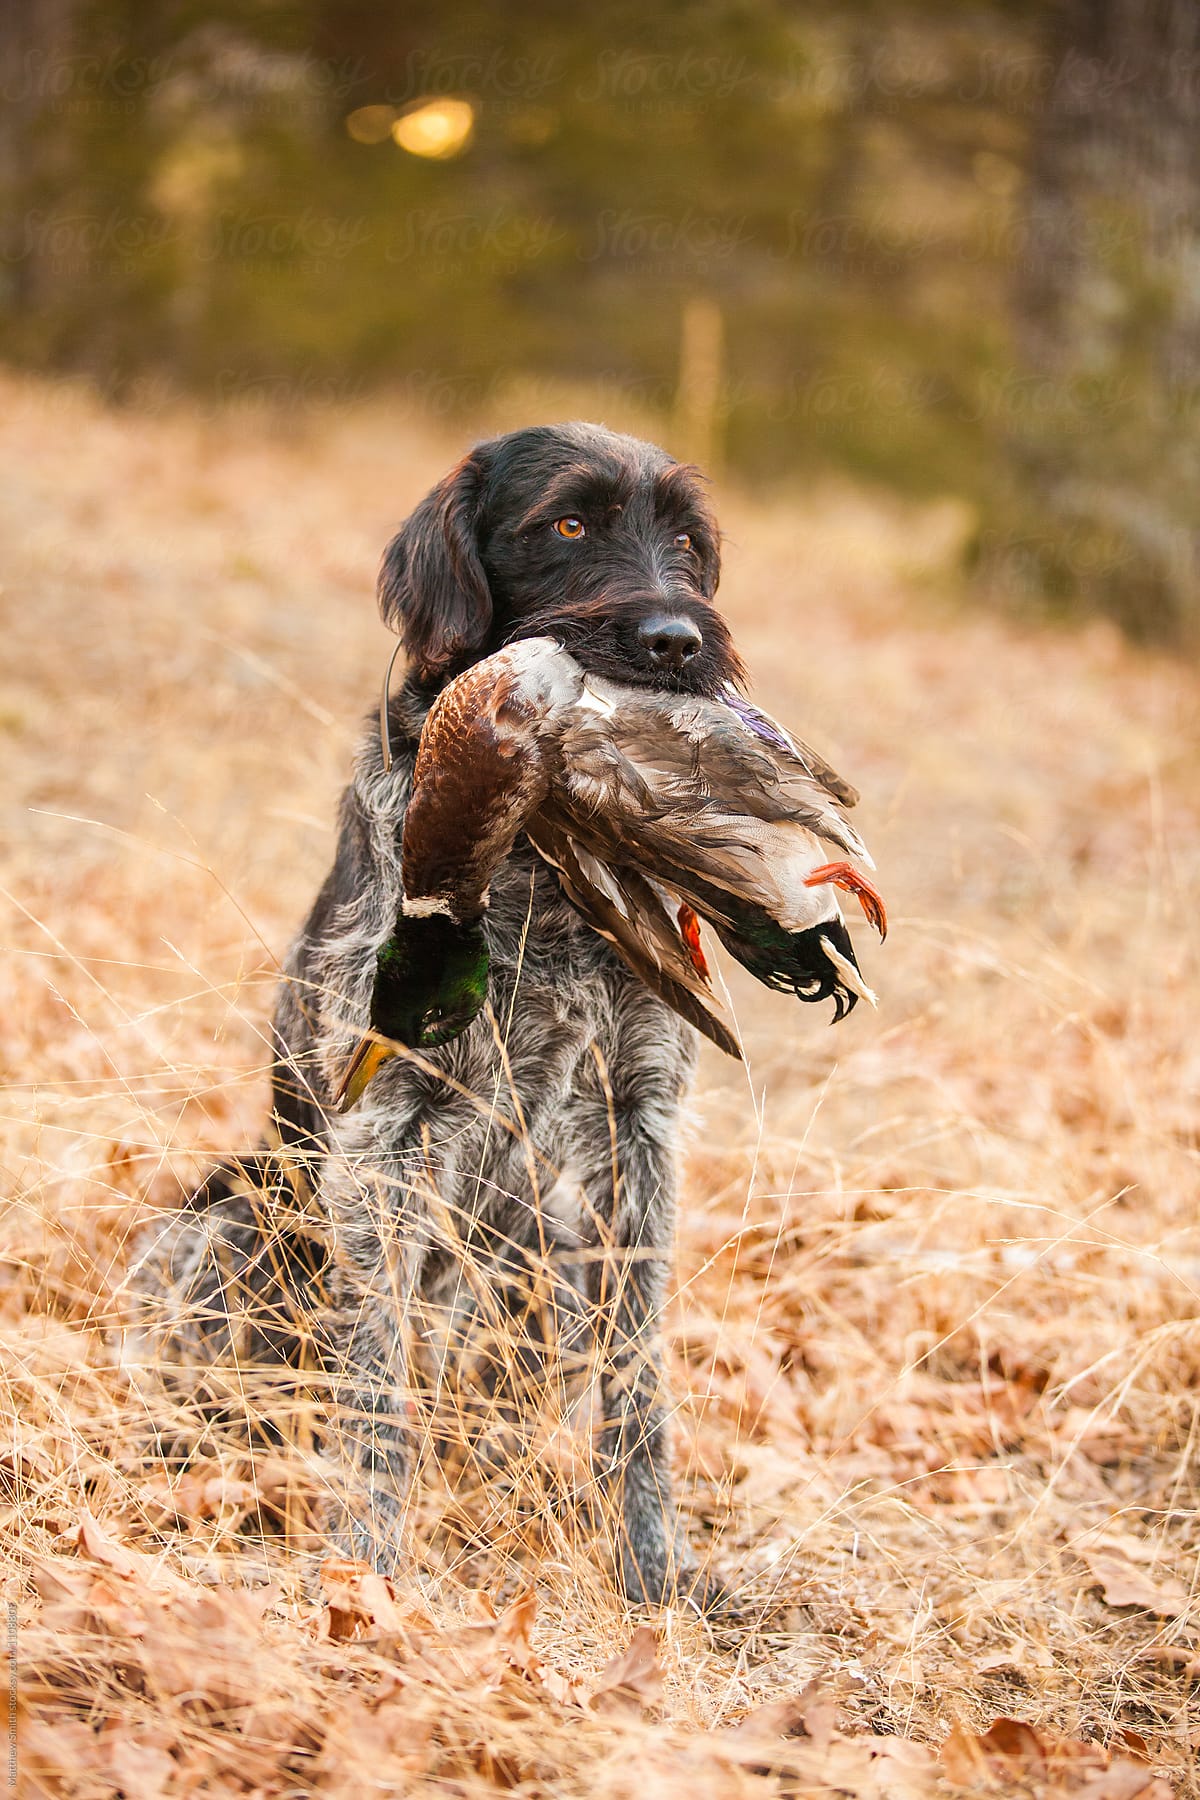 Hunting Dog Holding Duck In Its Mouth by Matthew Smith - Stocksy ...